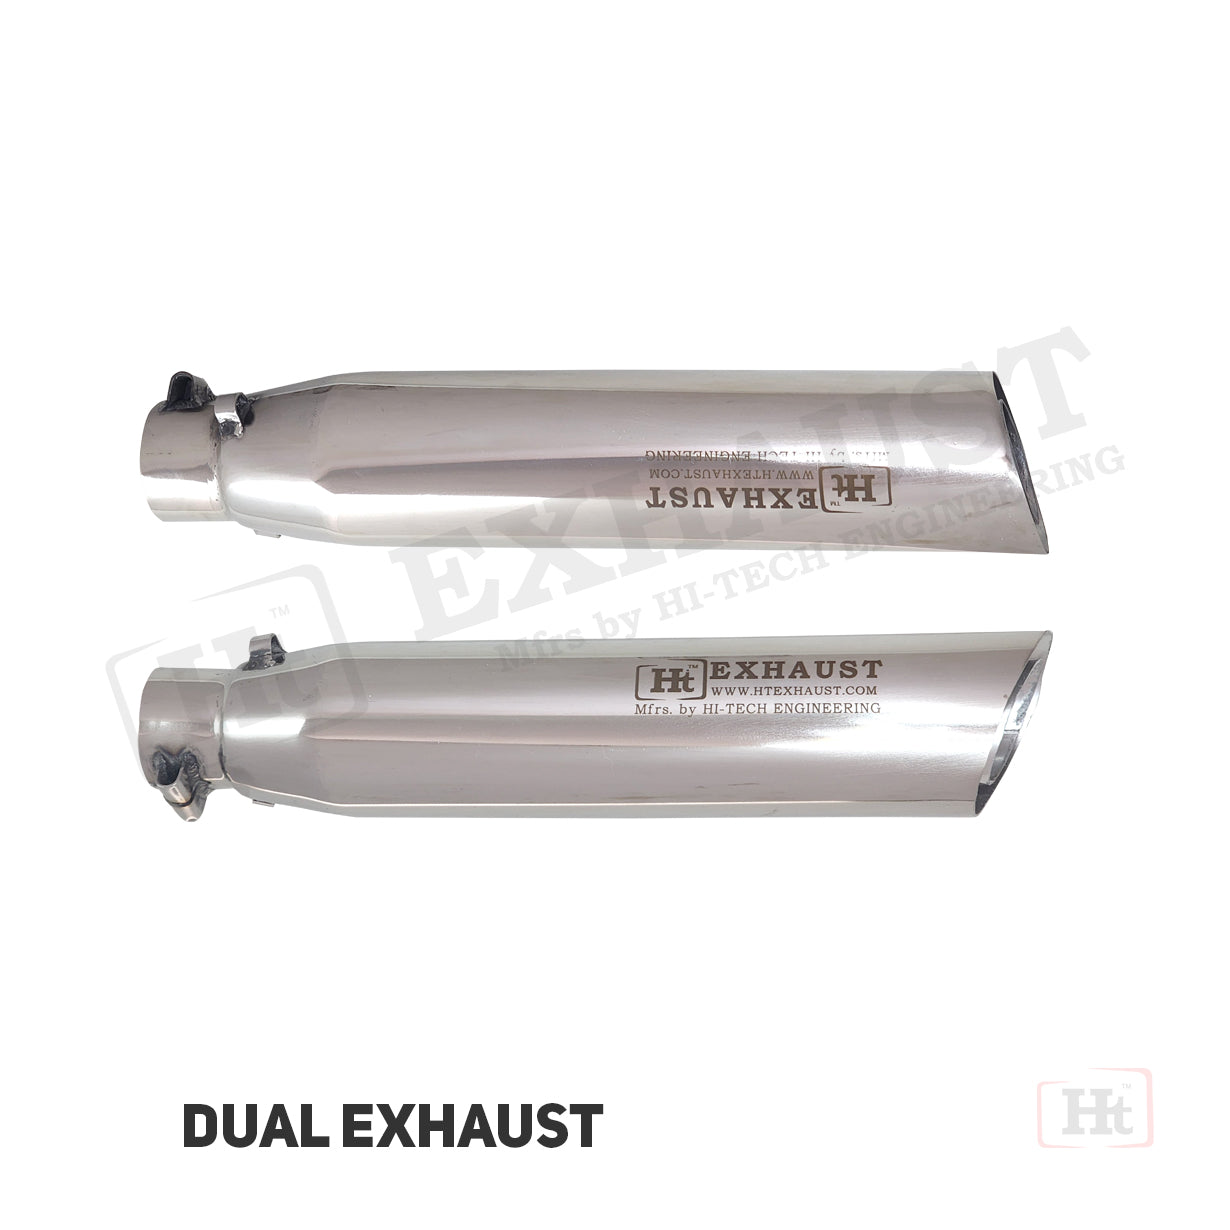 Dual Exhaust – FOR SCRAM 411 / Ht exhaust – Exhaust only